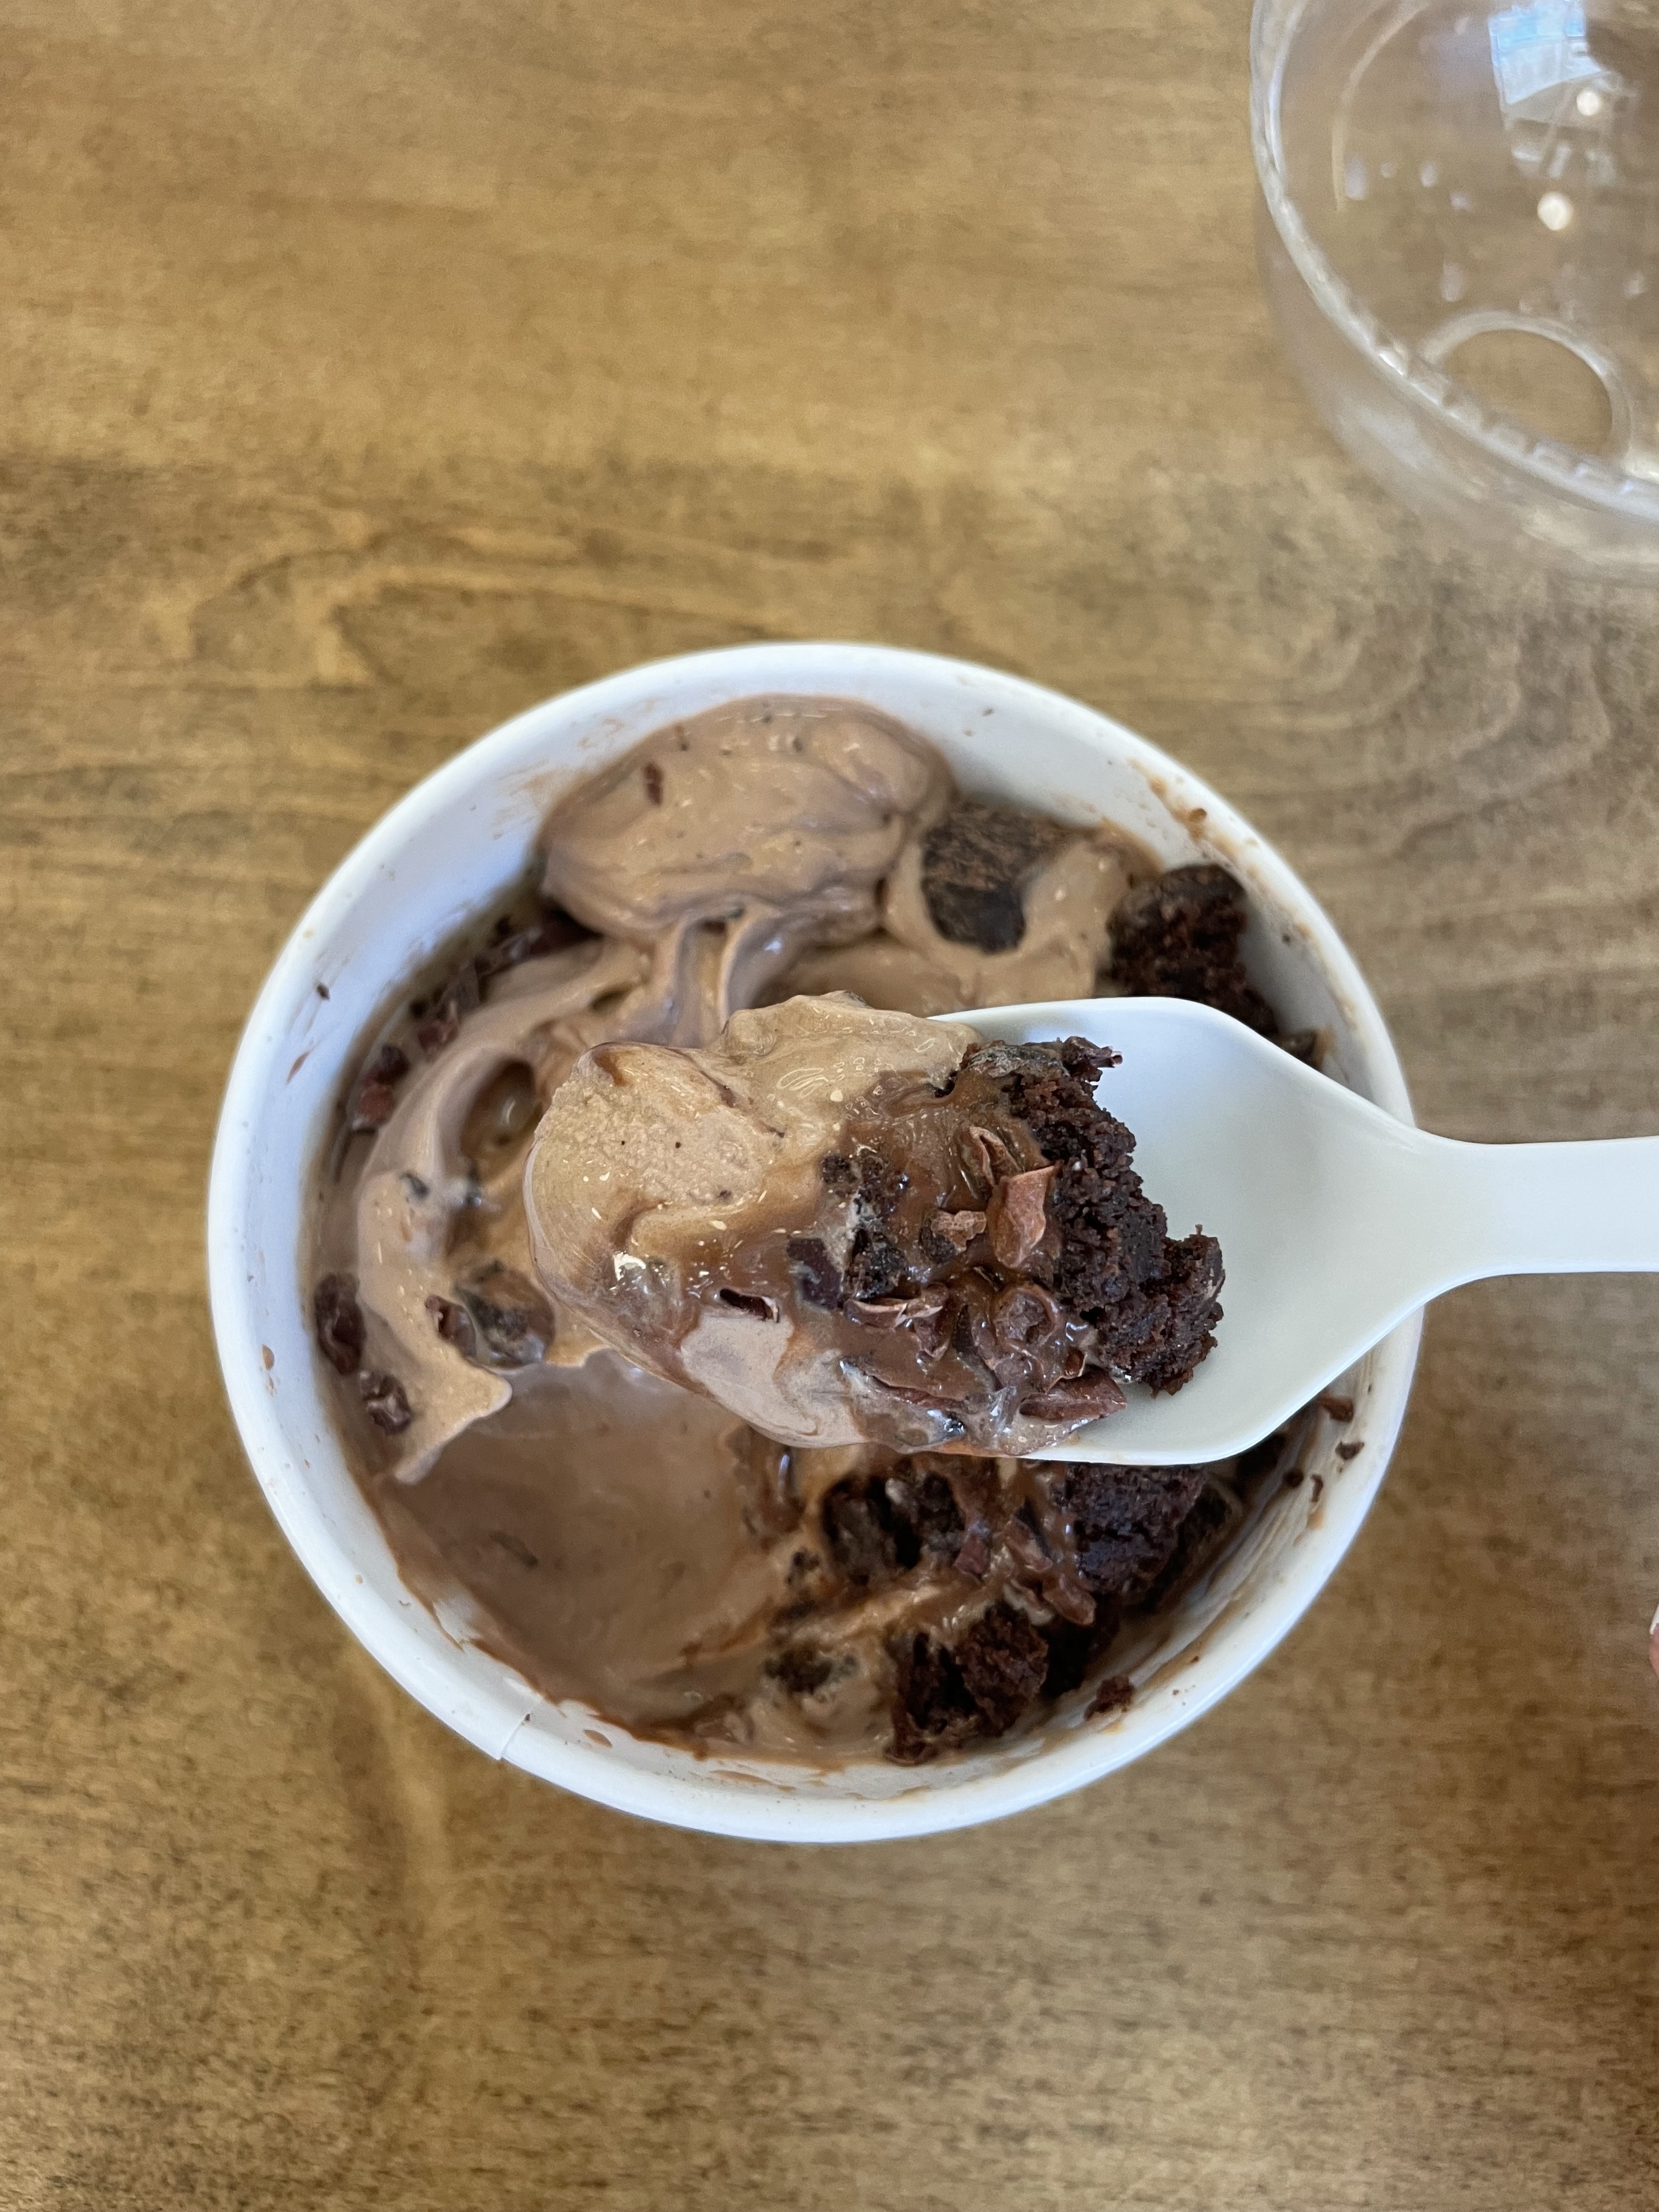 A spoonful of chocolate ice cream with brownie chunks is lifted from a white cup